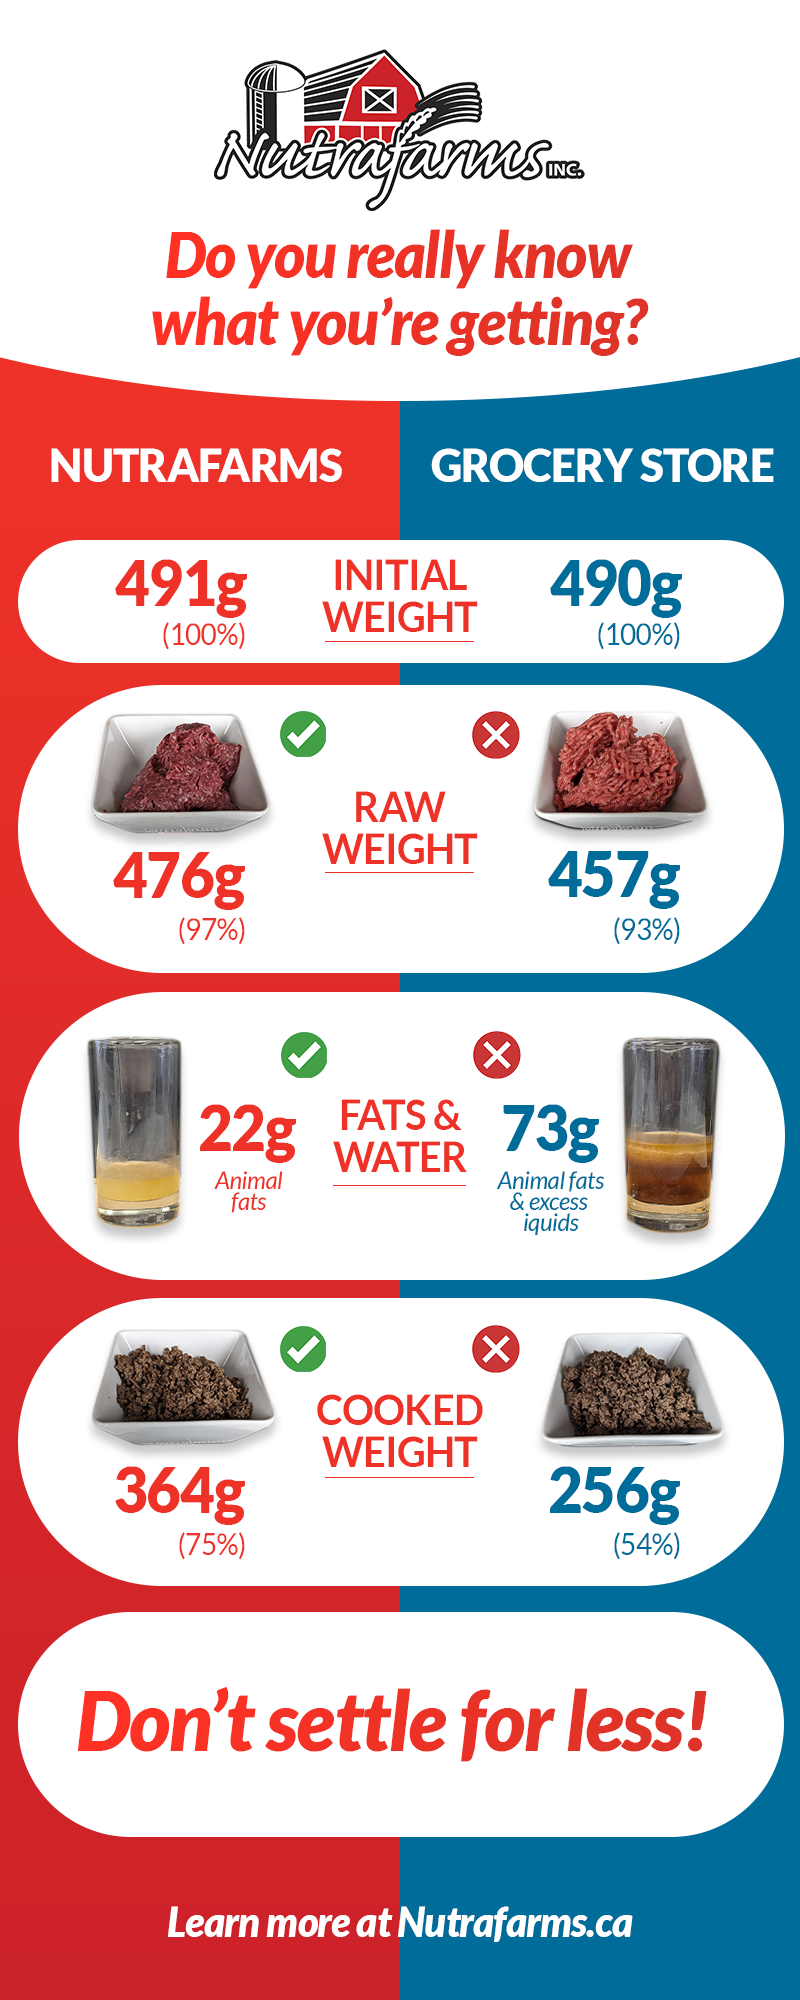 Grass-Fed-Ground-Beef-Vs-Grocery-Store-Ground-Beef-image-7